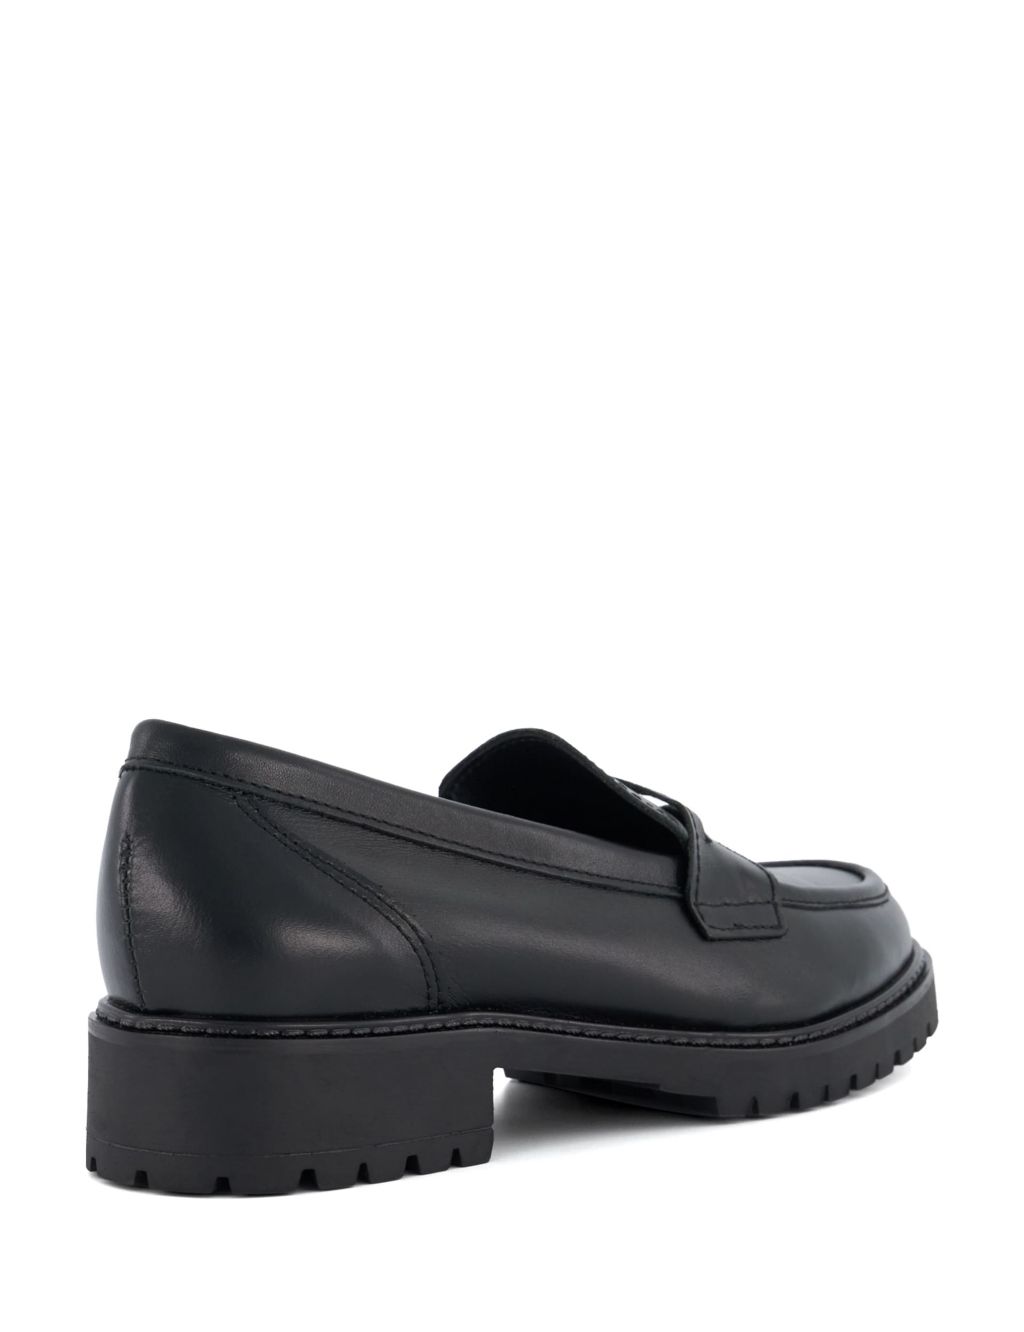 Wide Fit Leather Slip On Loafers | Dune London | M&S